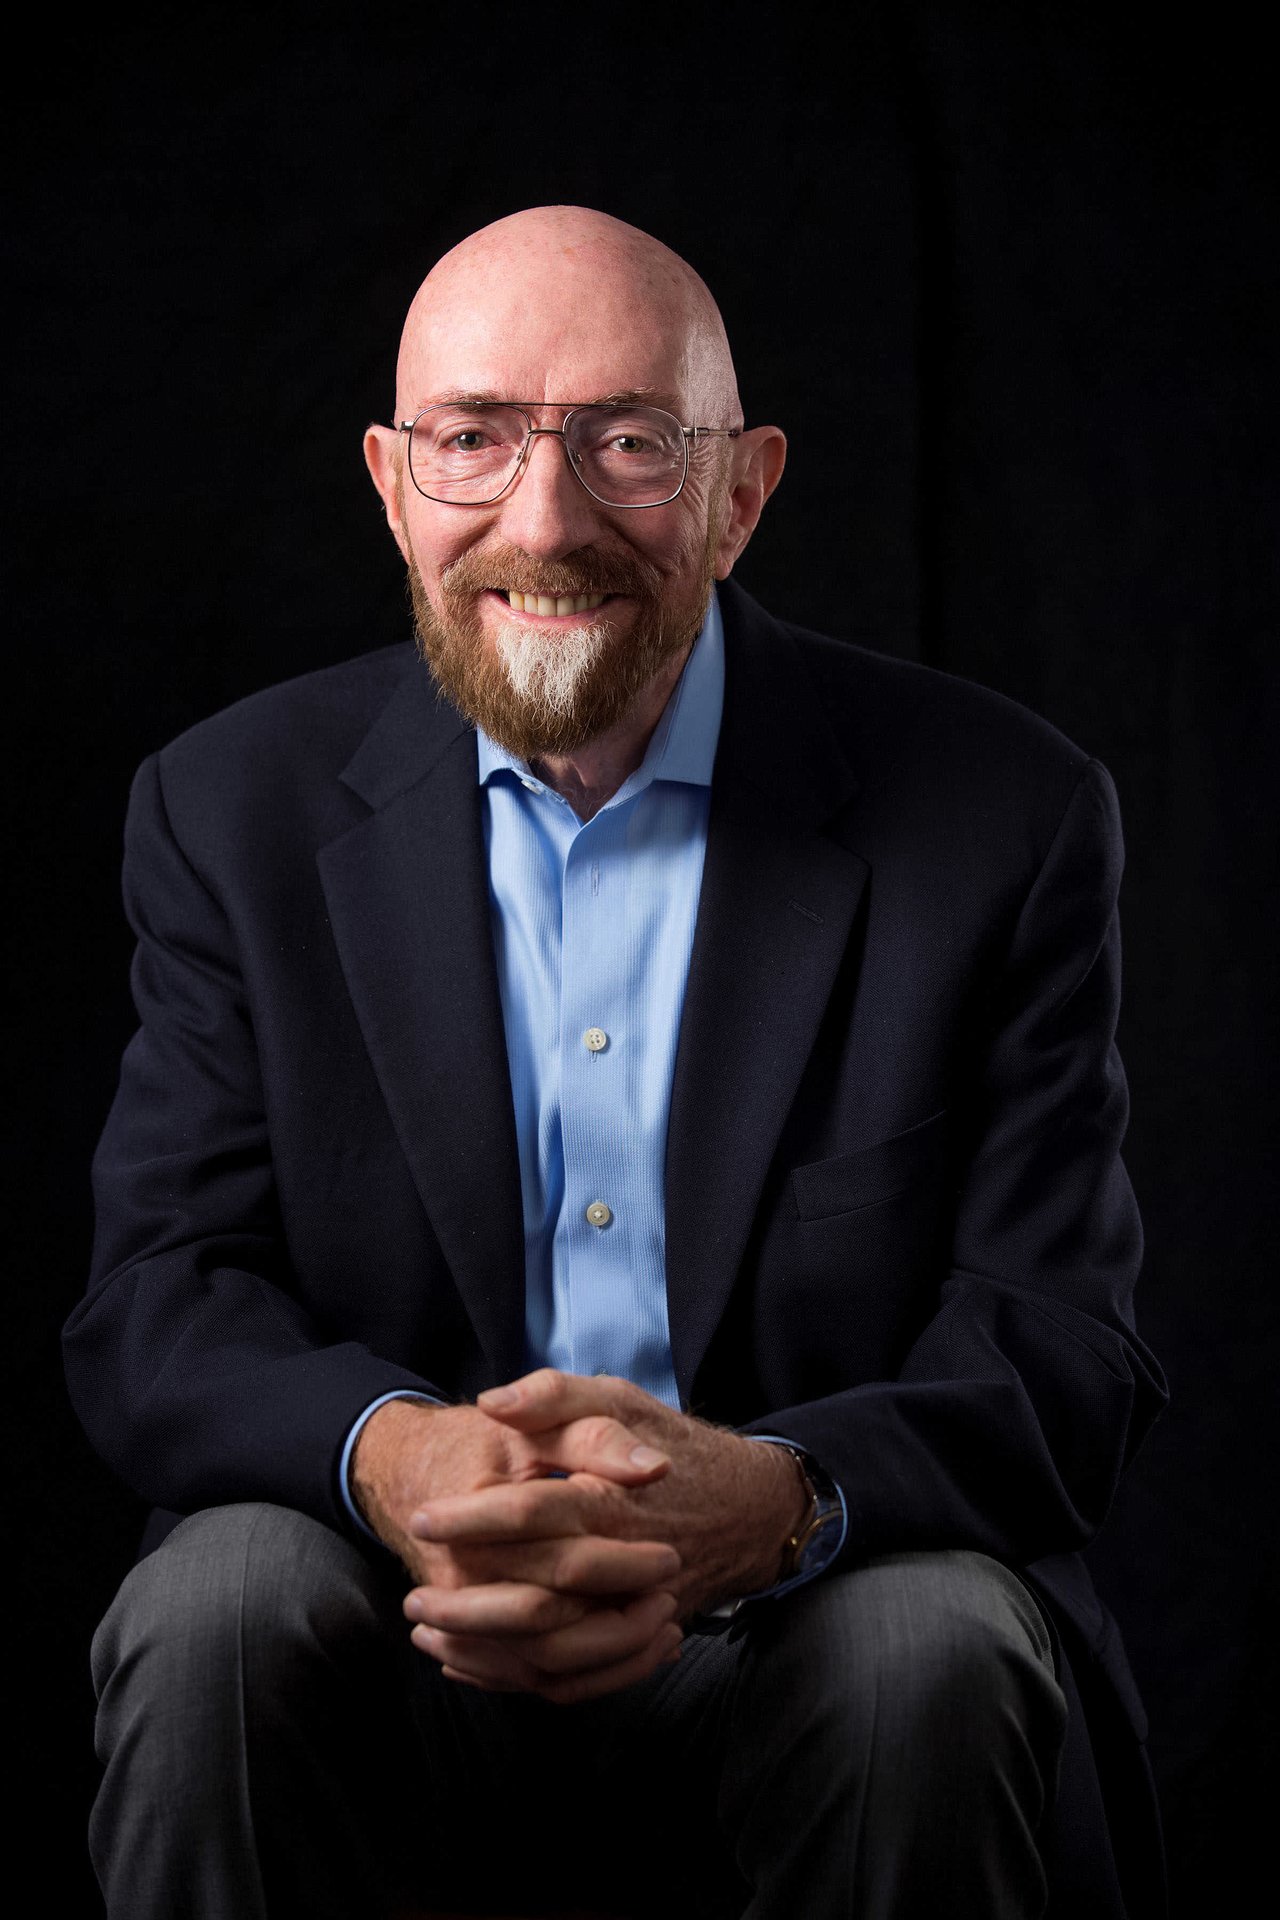 Kip Thorne, recipient of the 2016 Gruber Cosmology Prize